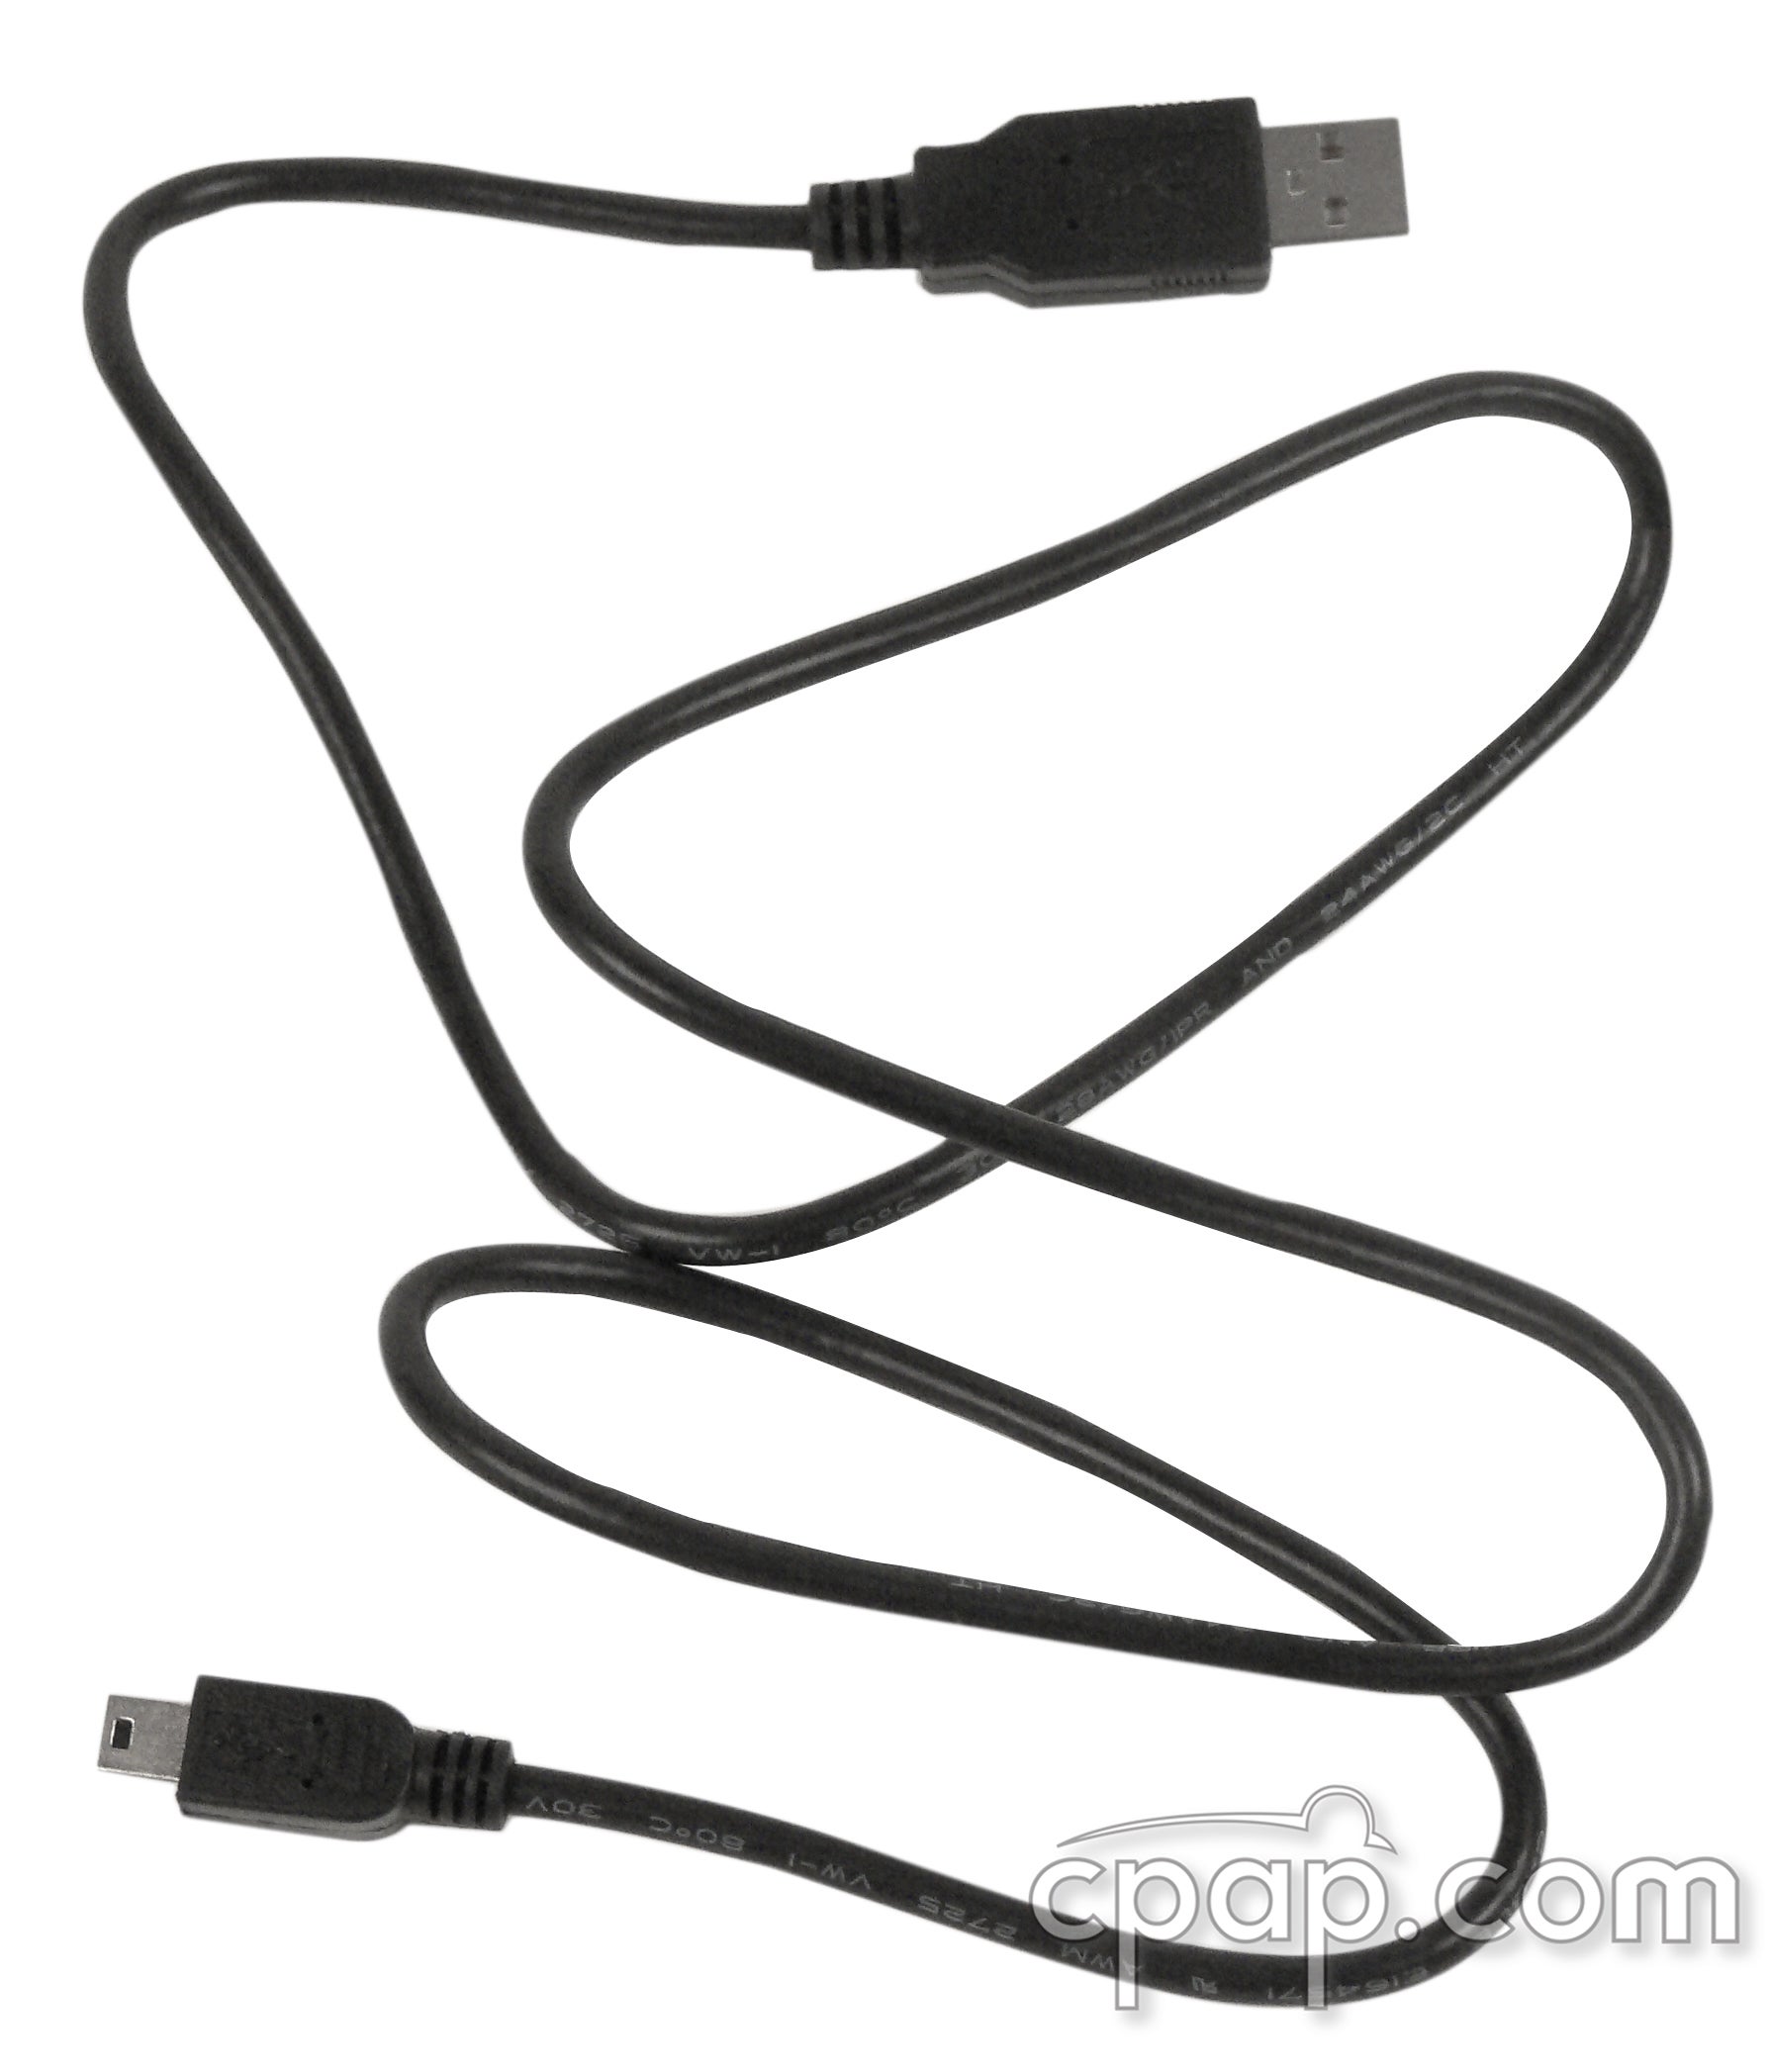 3-ft-usb-2-type-a-male-to-mini-b-male-cable